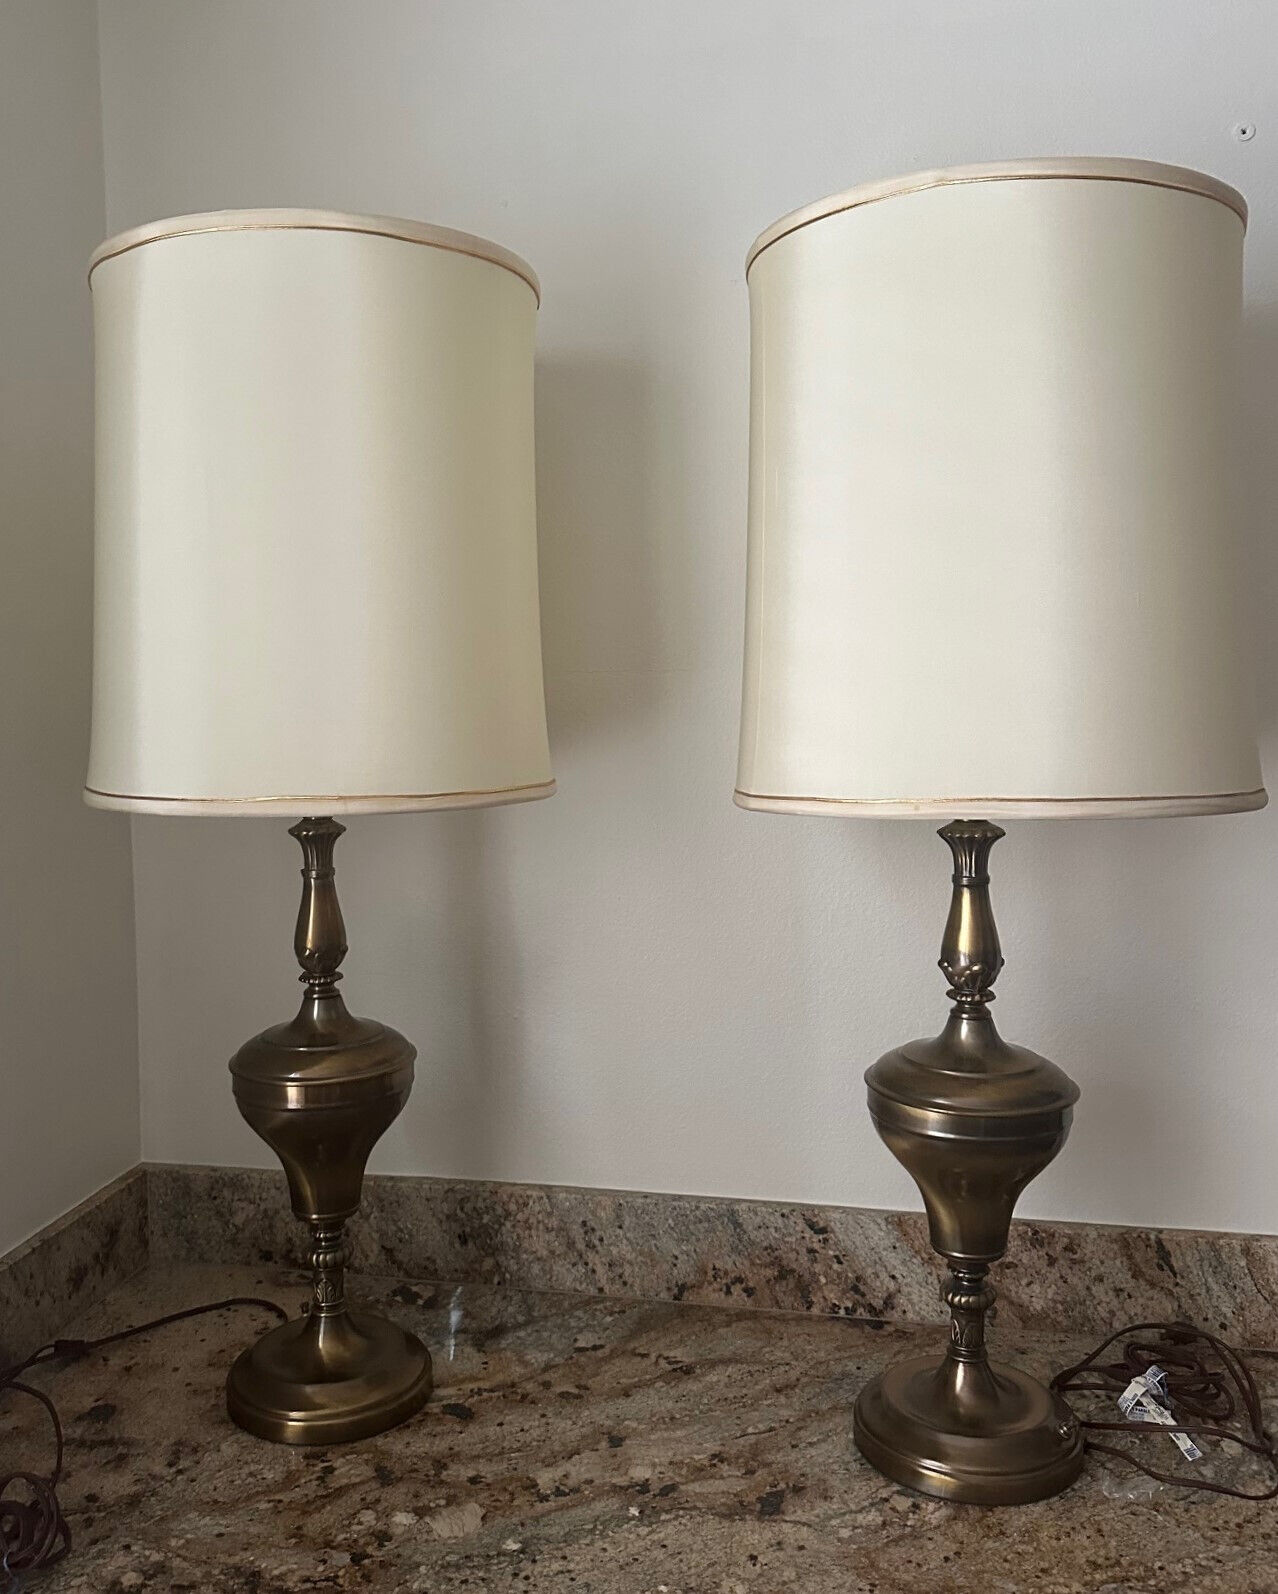 Pair of 2 Vintage REMBRANDT Masterpiece Brass Table Lamps w Original Shades